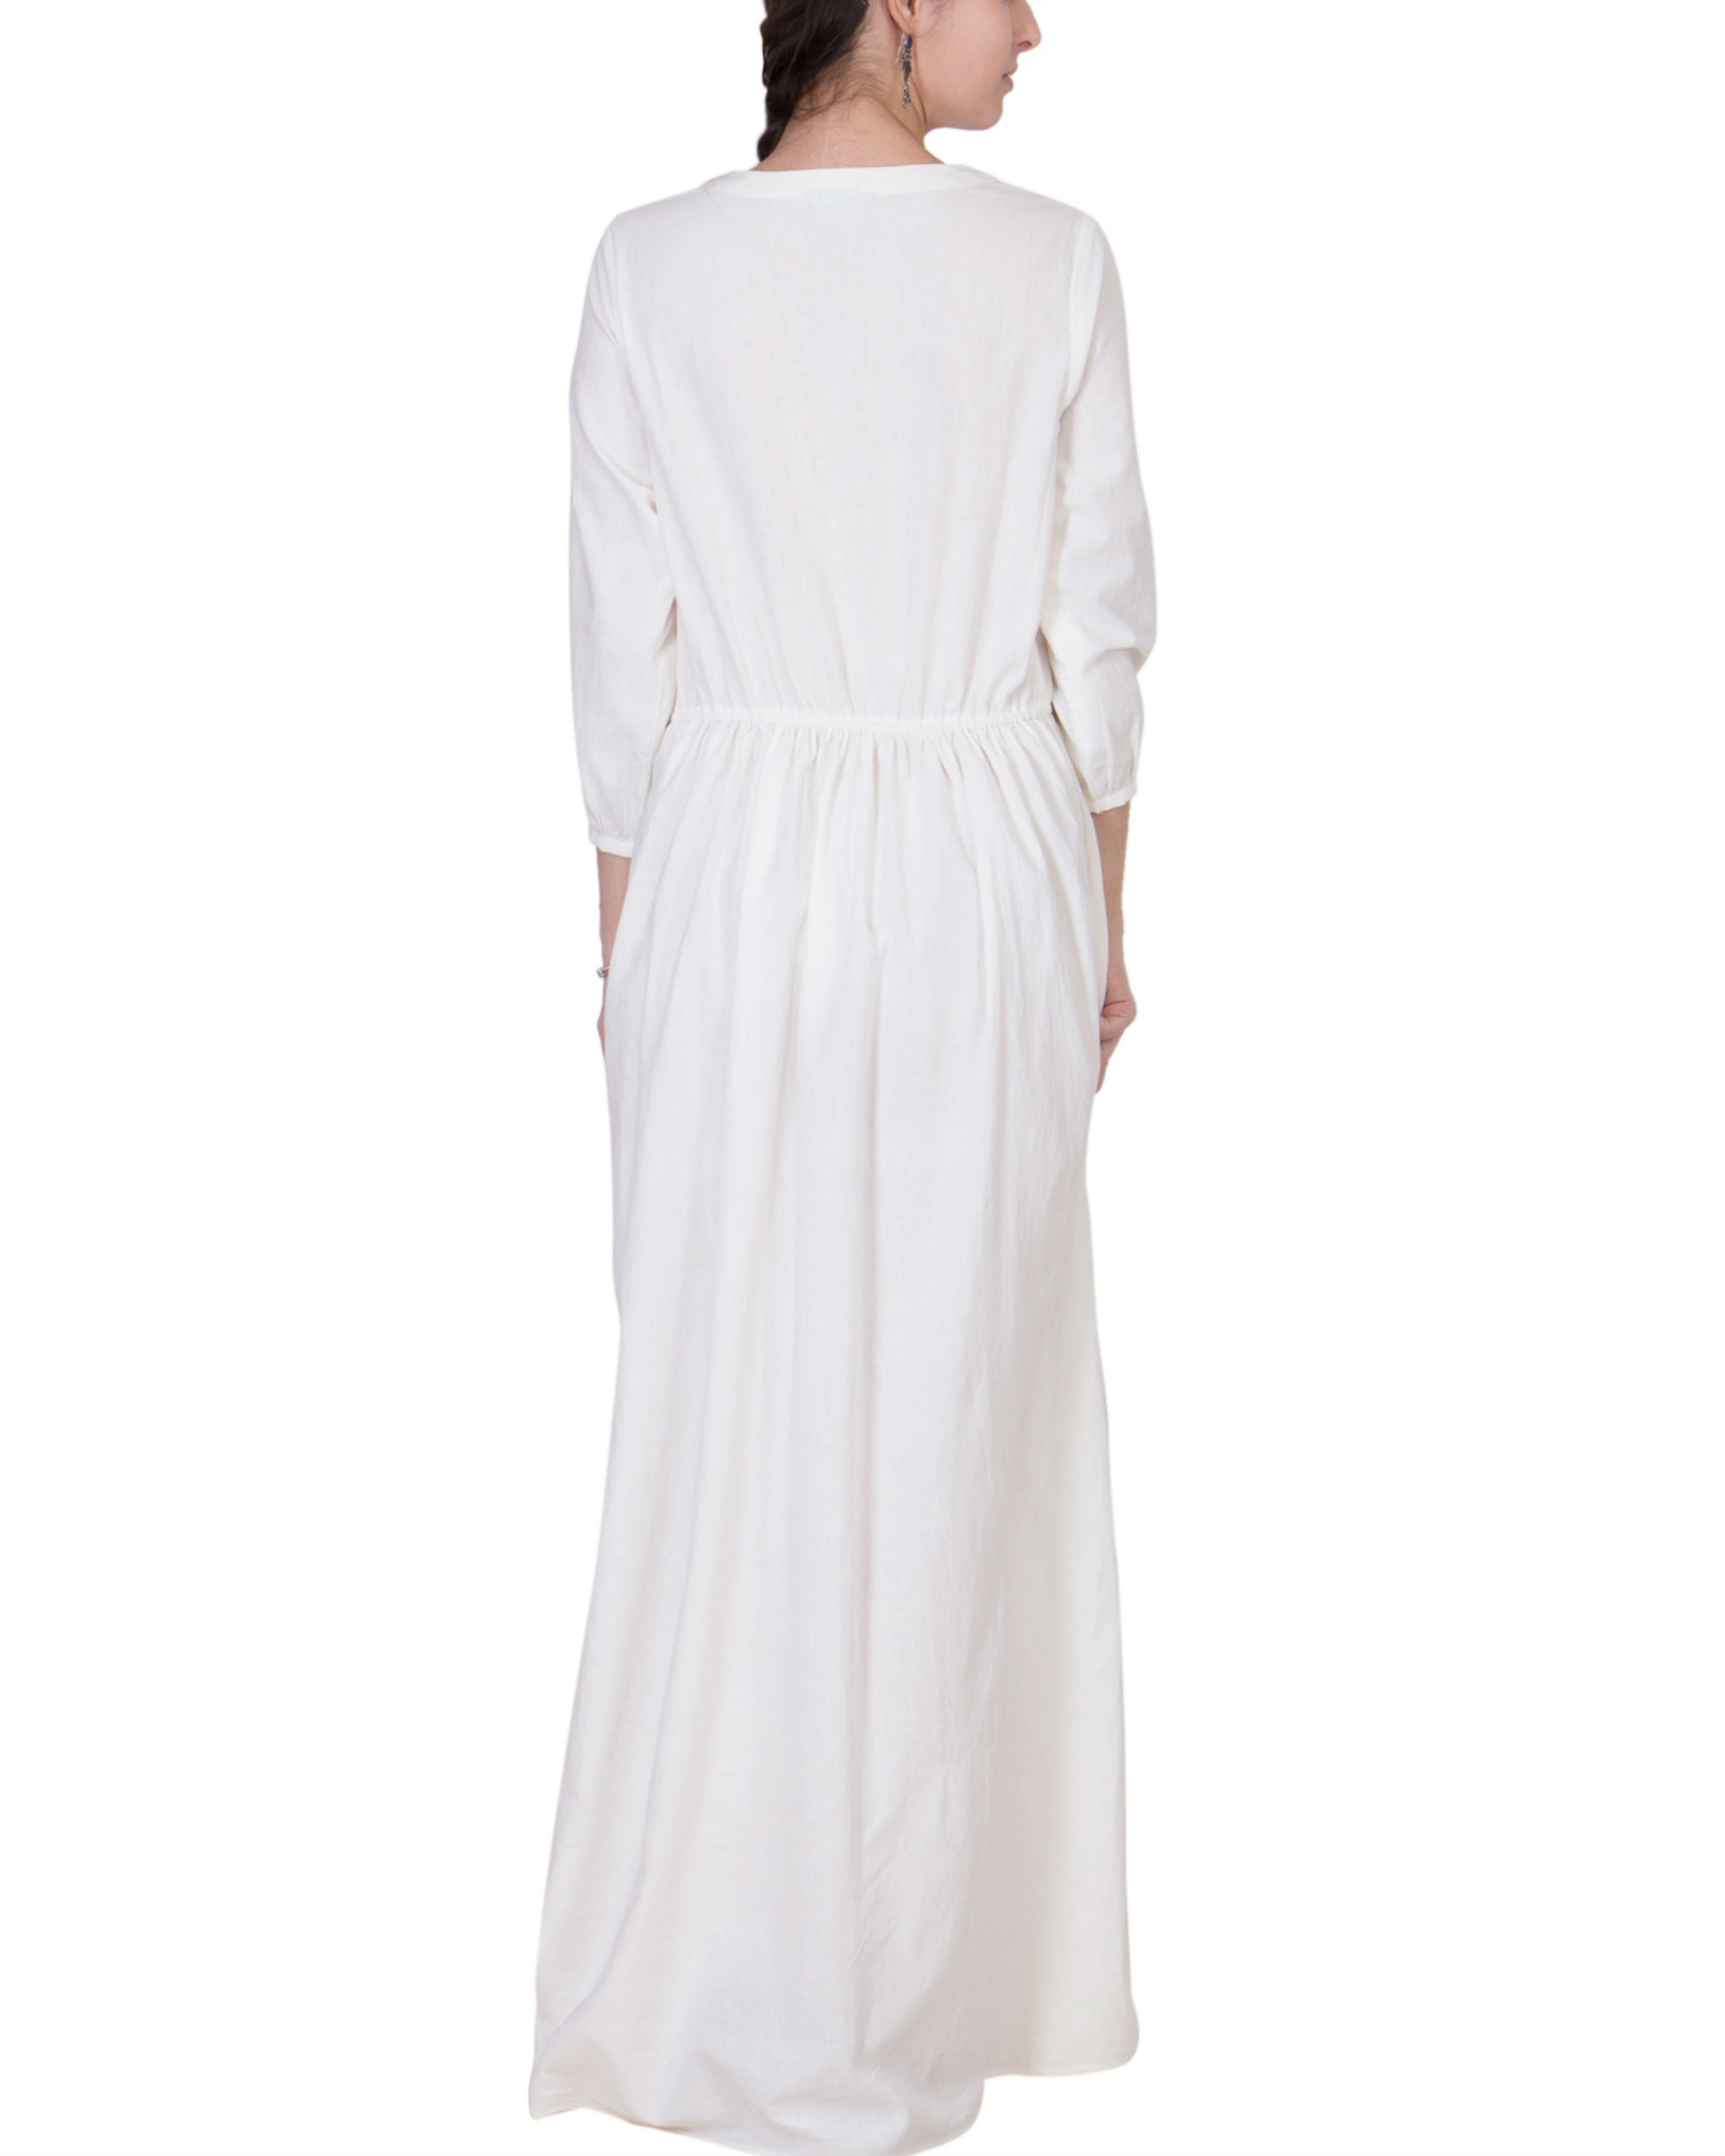 White muslin maxi by ANS | The Secret Label